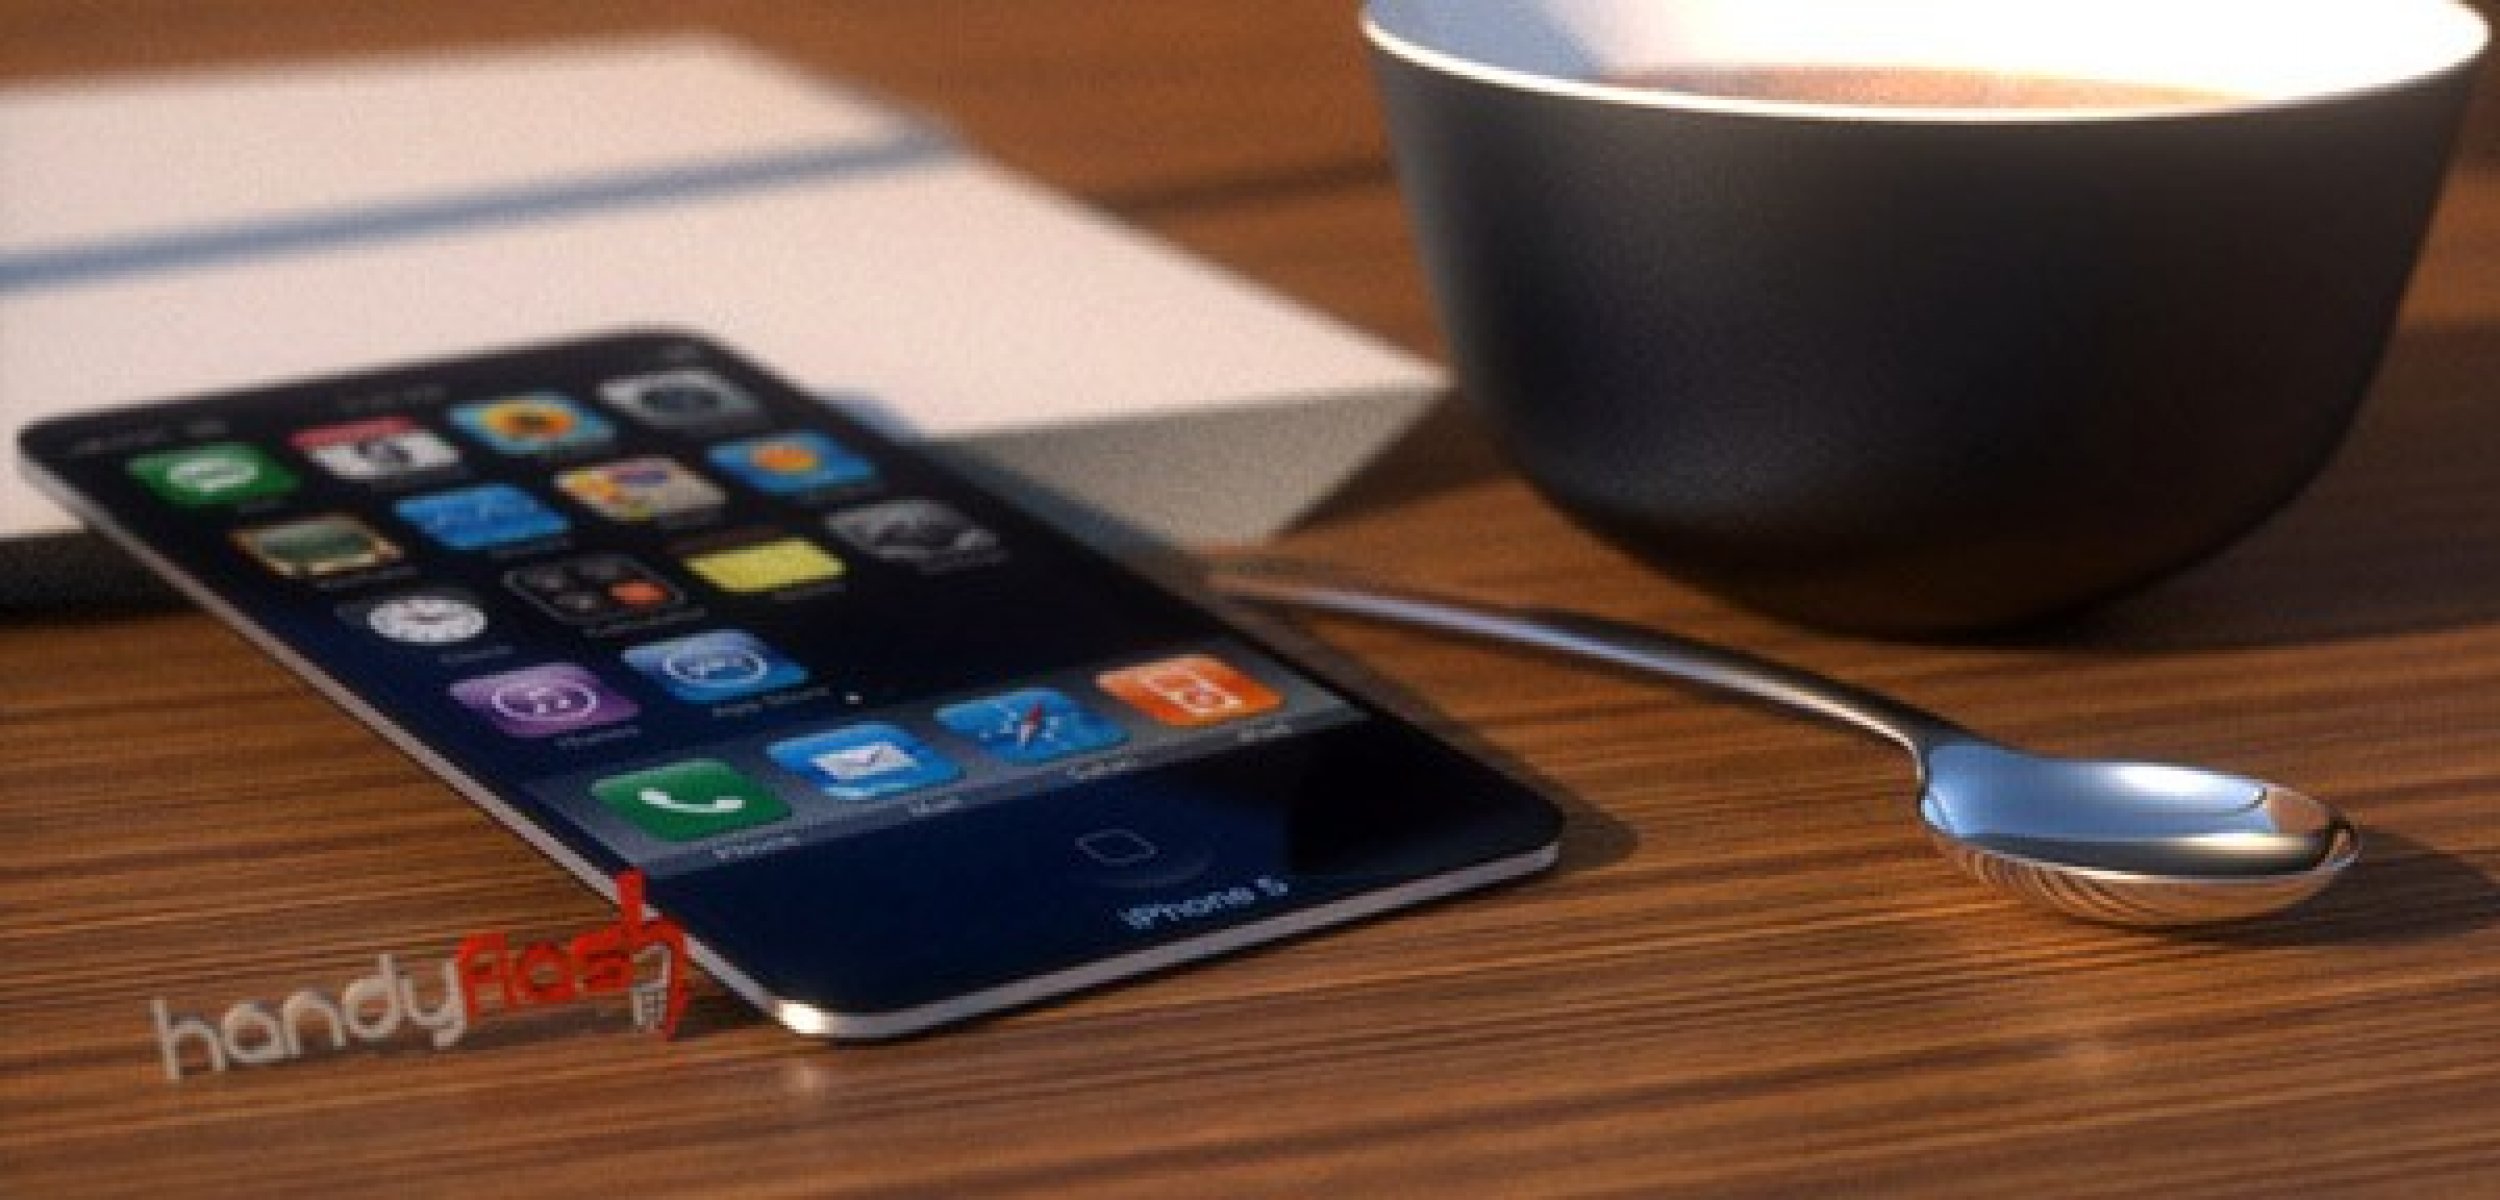 iPhone 5 Concept - Design by HandyFlash